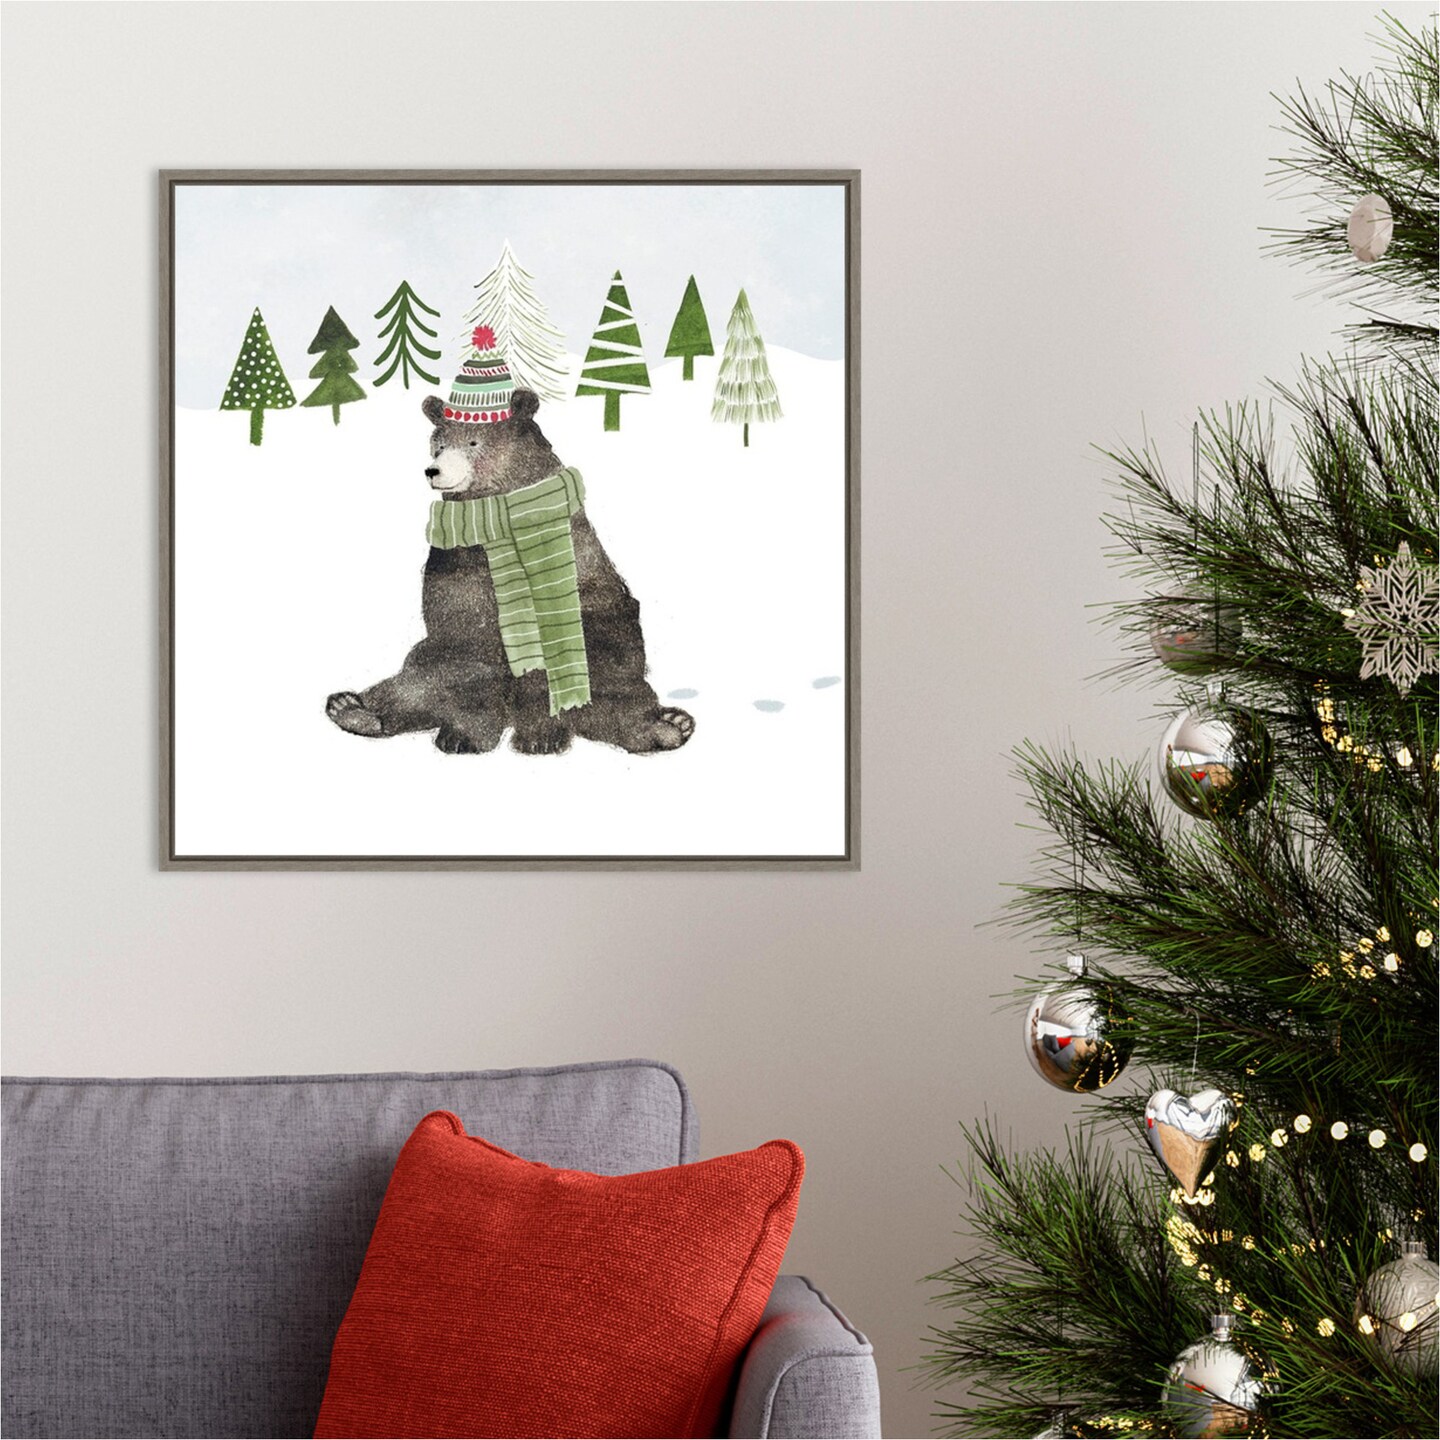 Woodland Christmas IV by Victoria Borges 22-in. W x 22-in. H. Canvas Wall Art Print Framed in Grey